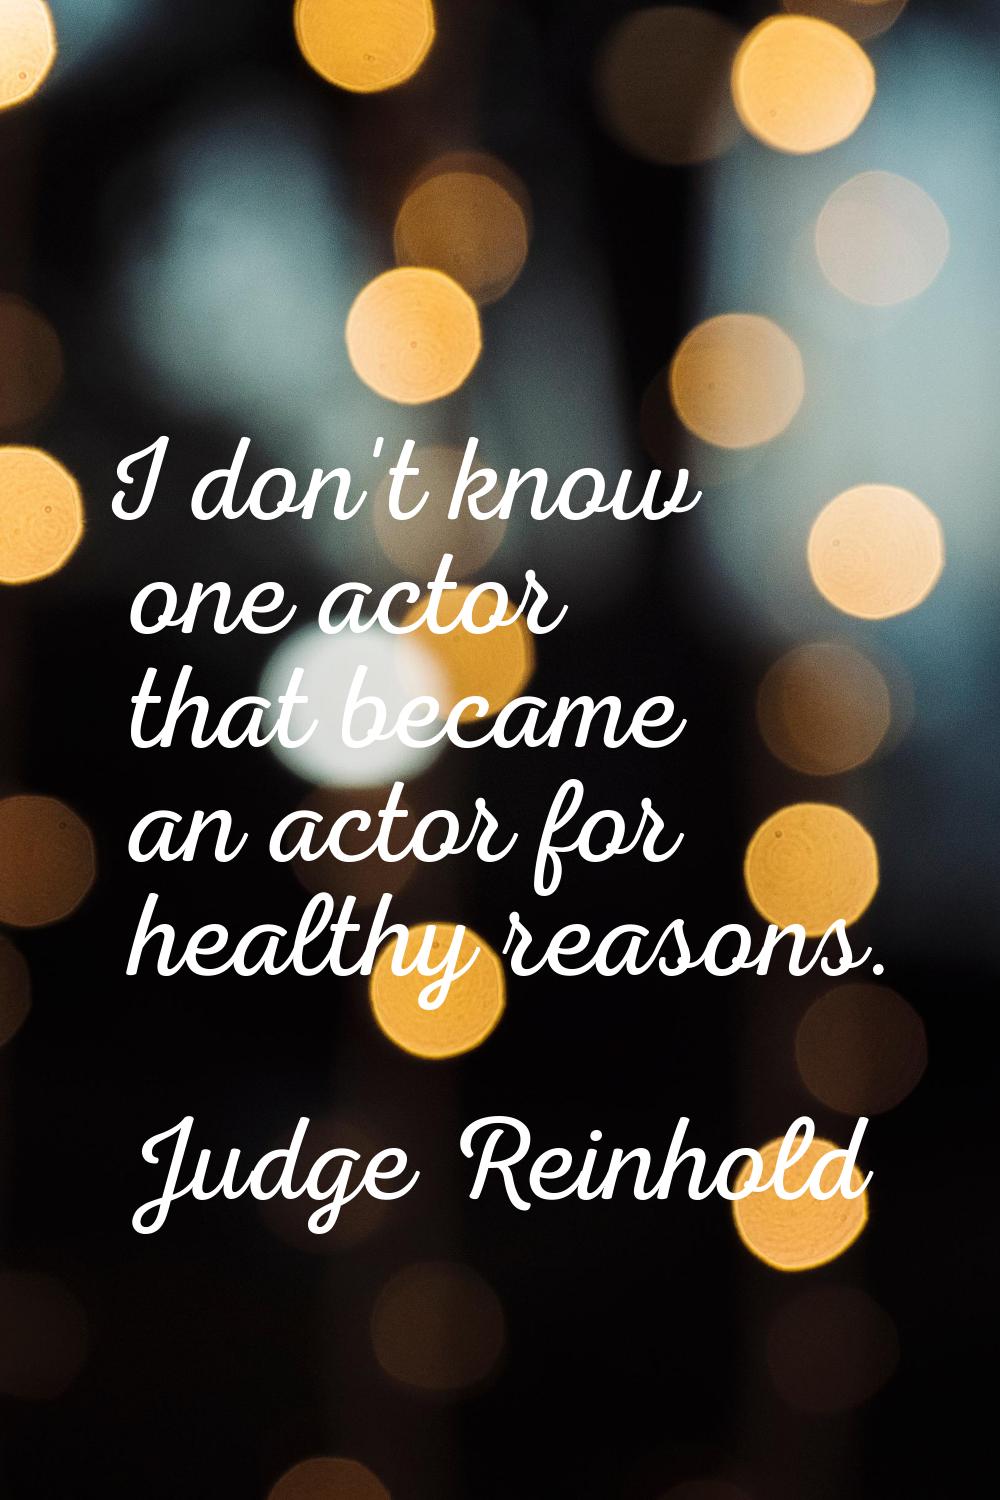 I don't know one actor that became an actor for healthy reasons.